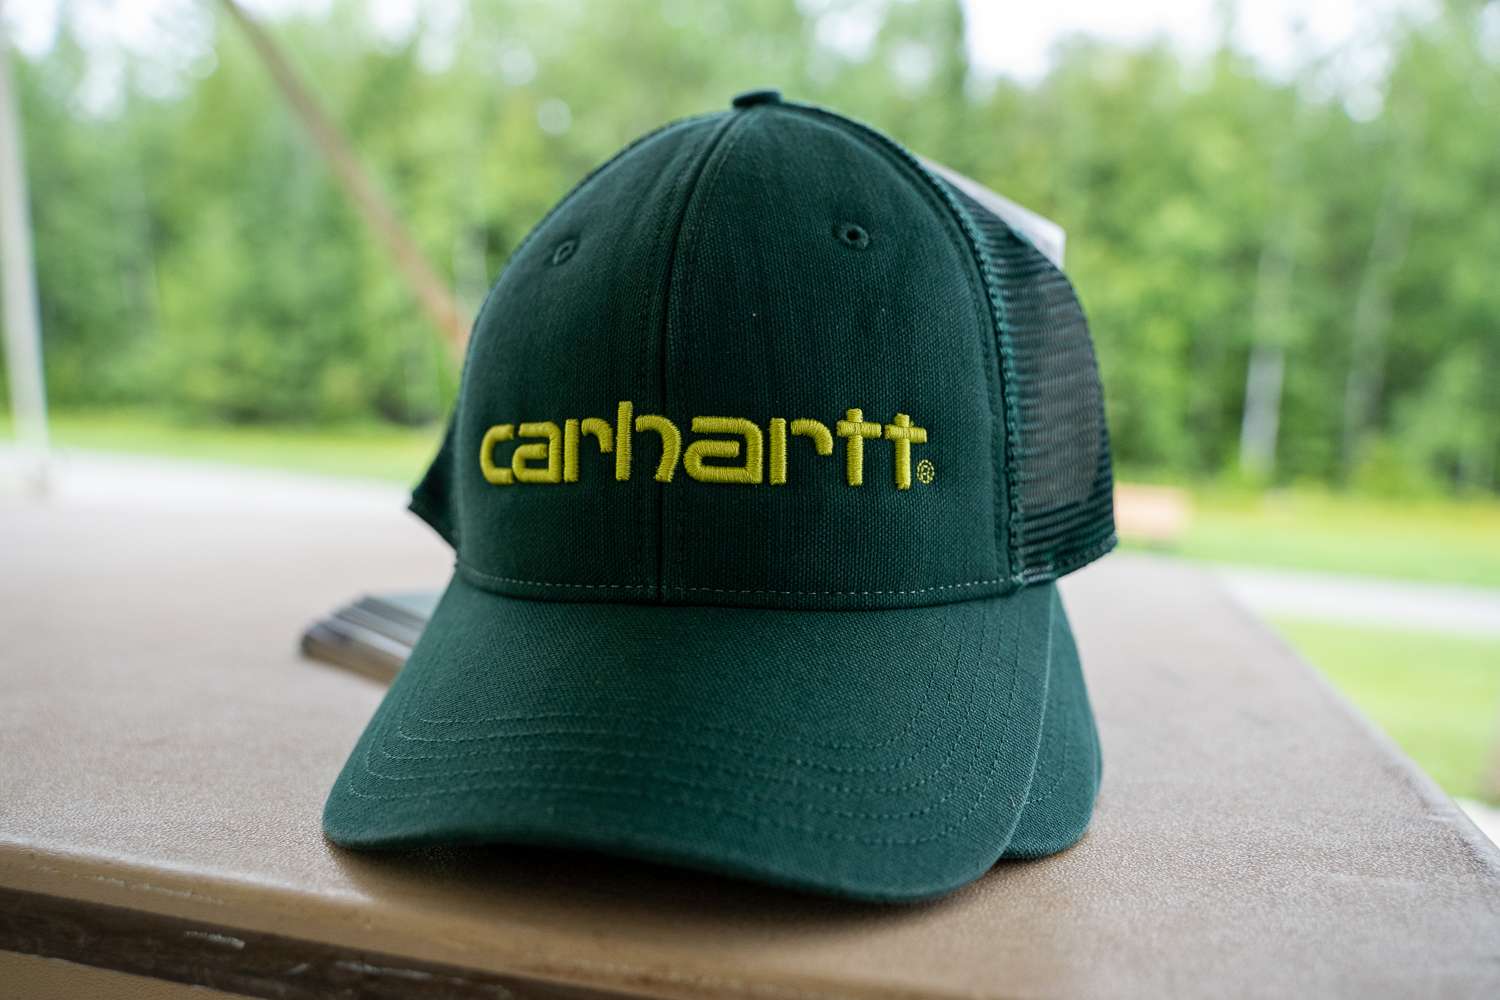 And even a Carhartt hat. 